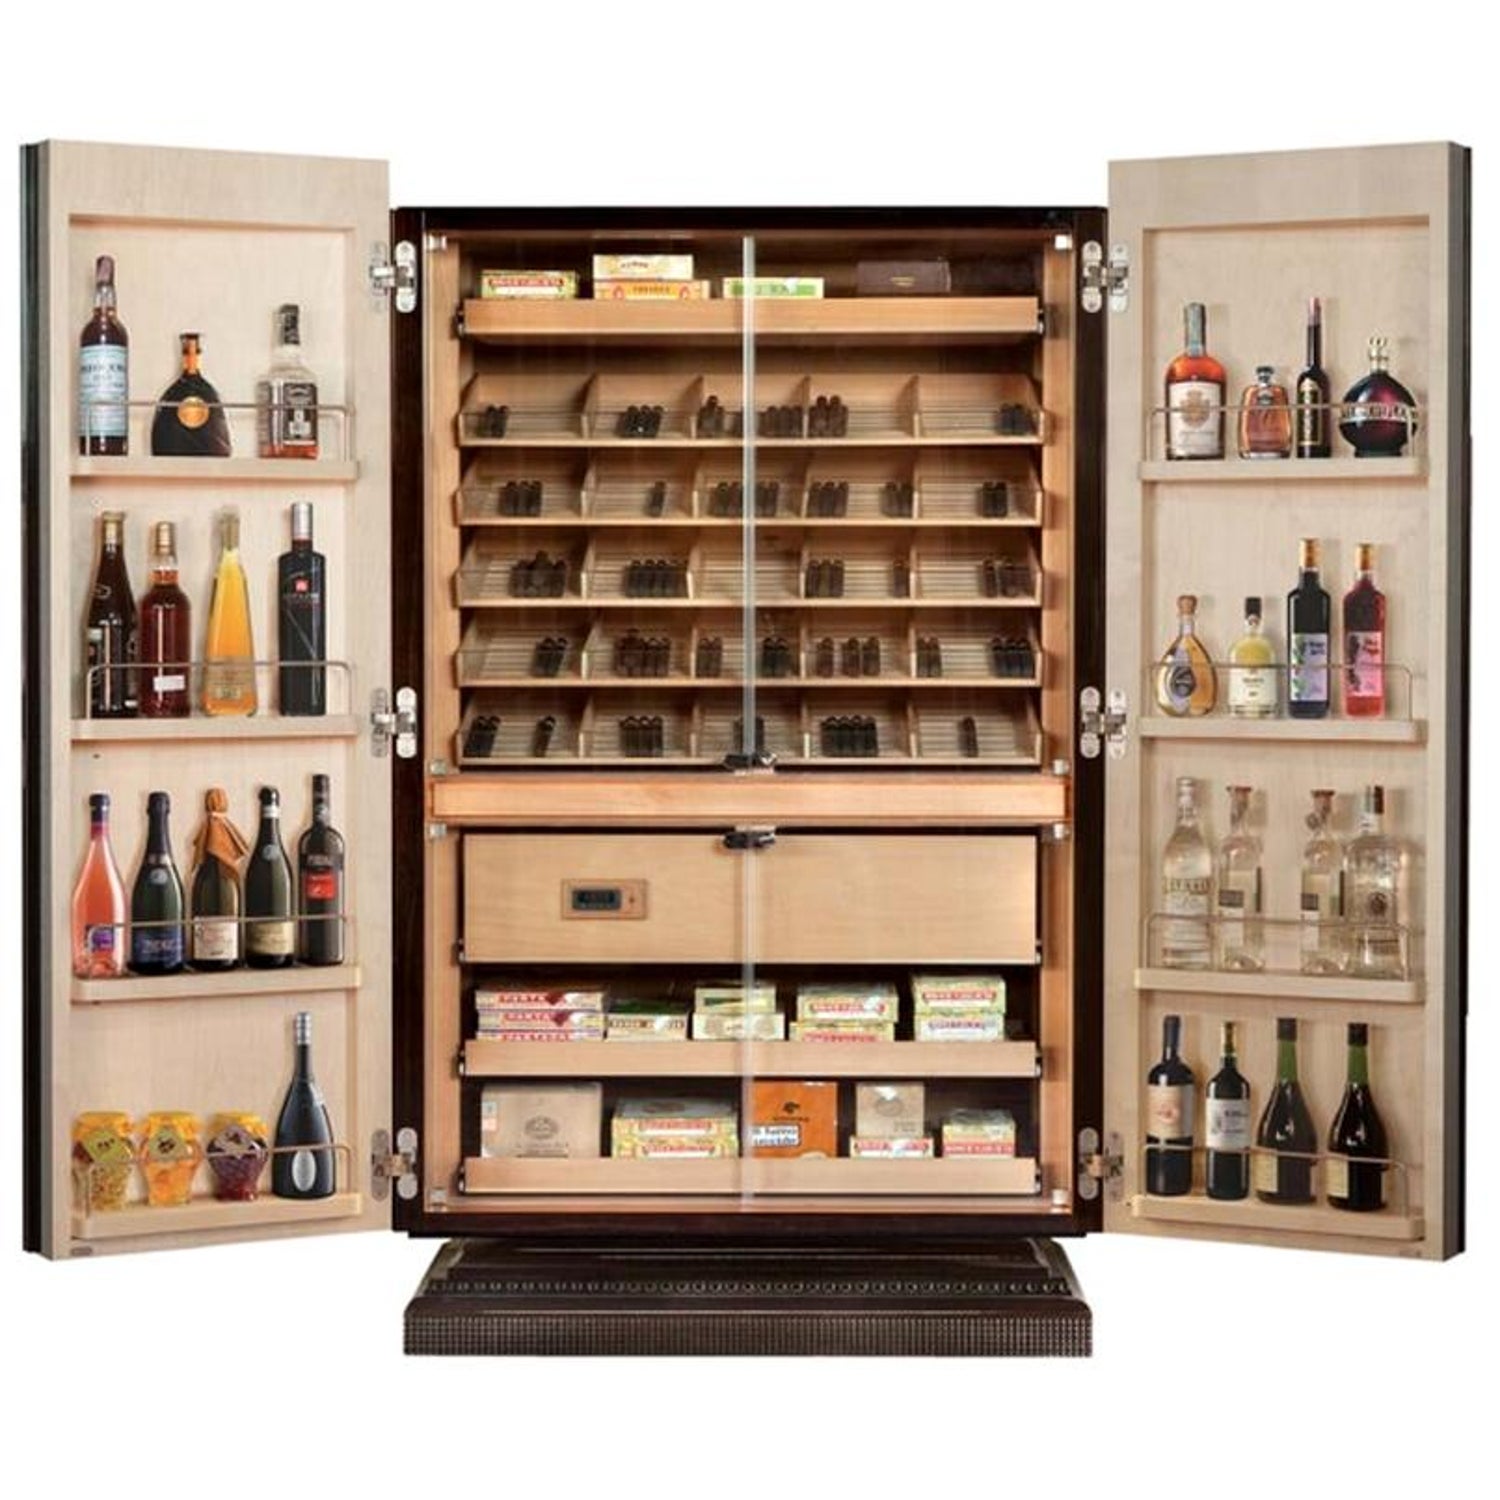 Multi-Functional Cigar Humidor Cabinet, by Massimo de Munari, Handmade in  Italy For Sale at 1stDibs